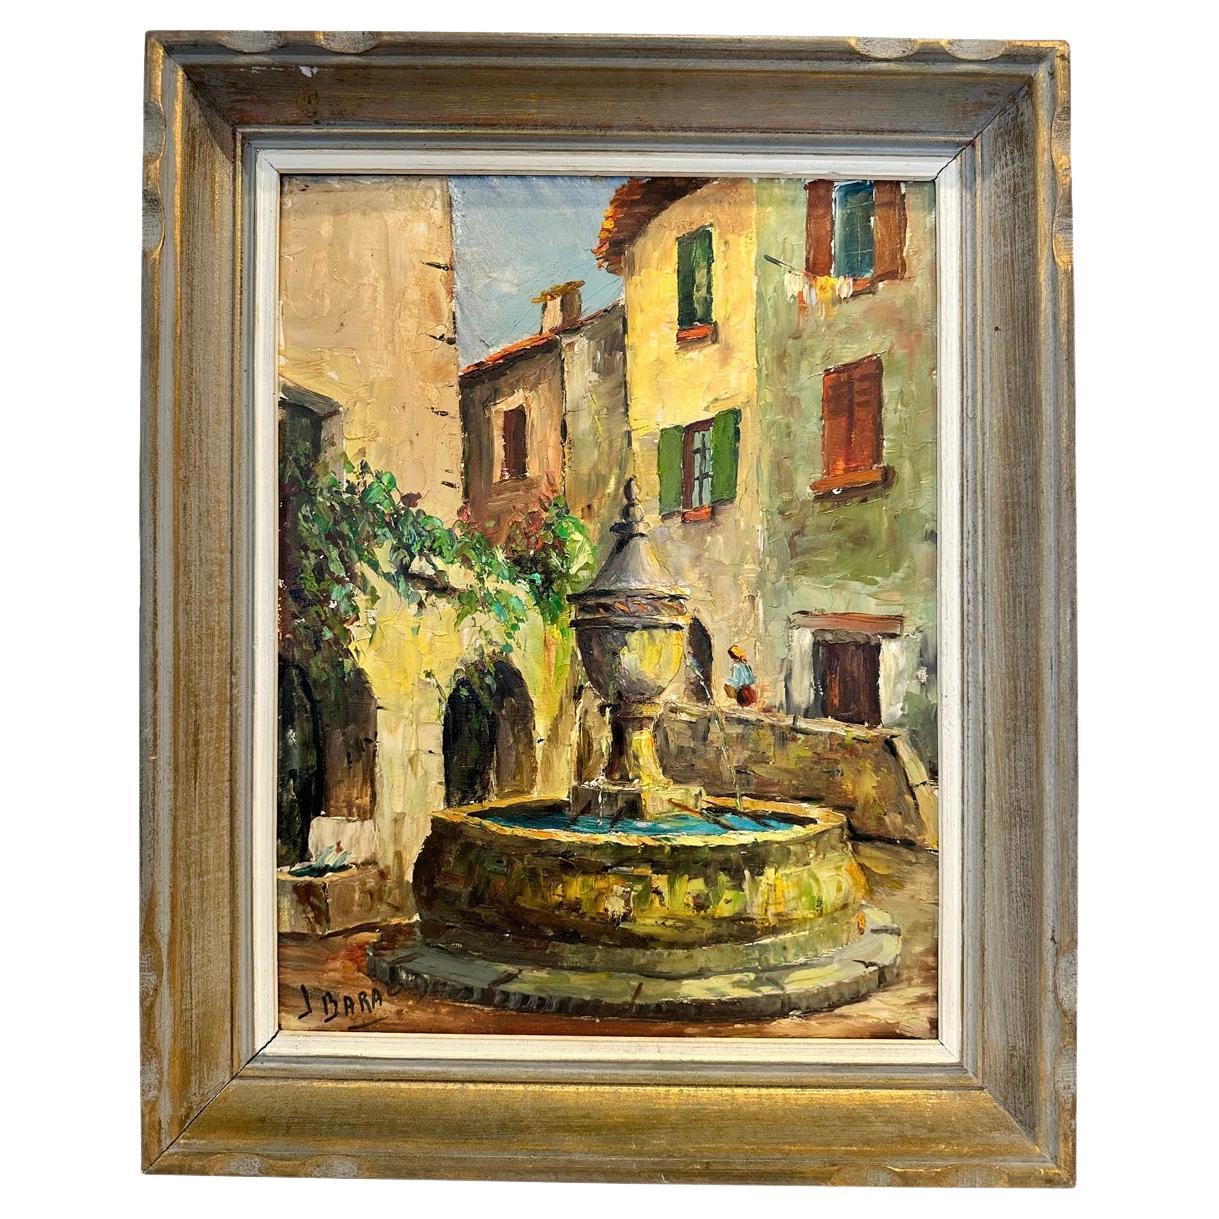 Vintage French Art For Sale